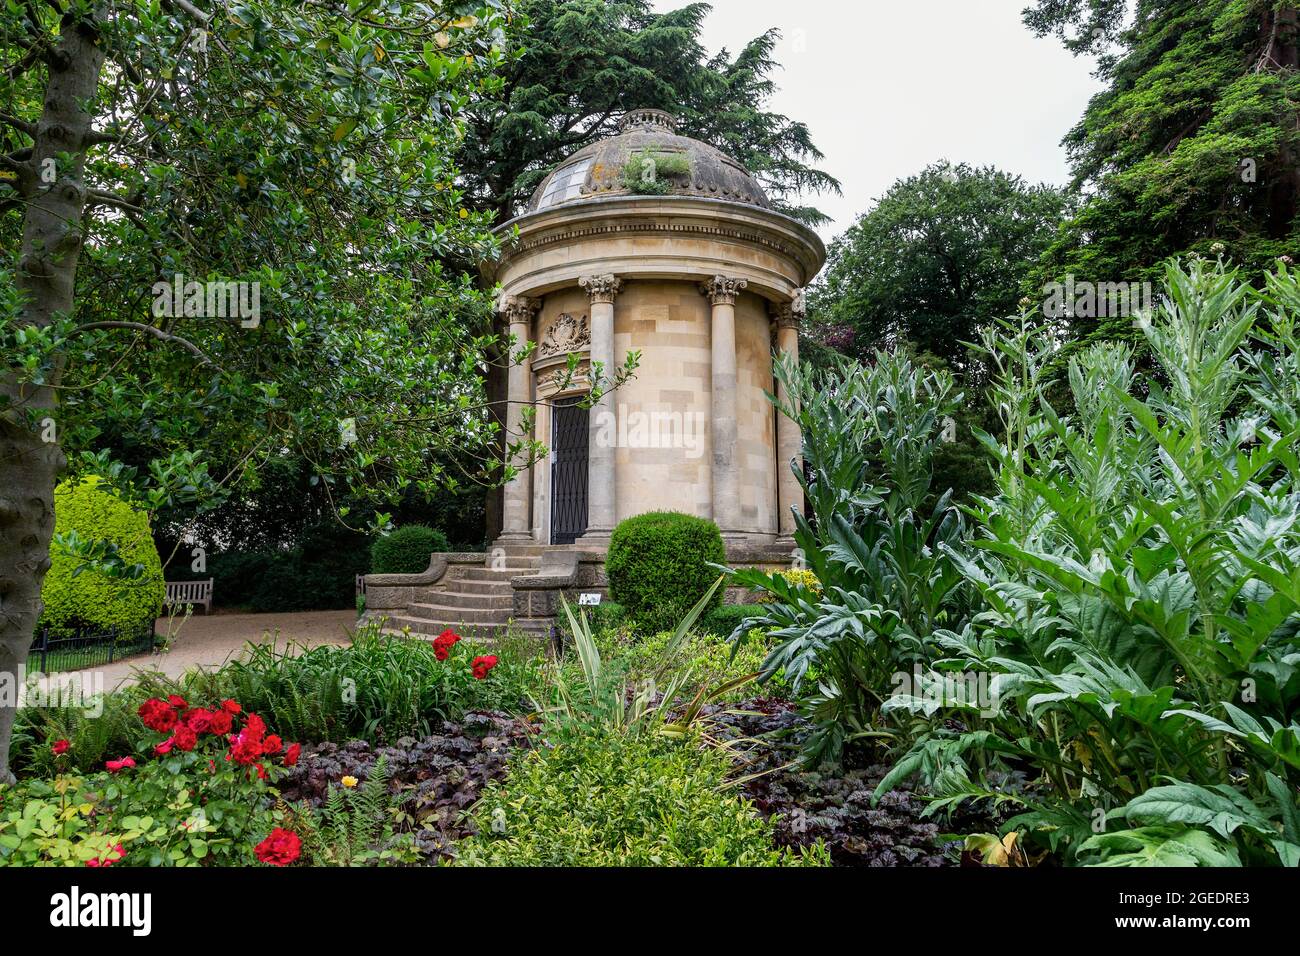 The Jephson Memorial, in Jephson Gardens, Royal Leamington Spa. A marble statue of Dr Henry Jephson stands on a plinth within. Stock Photo